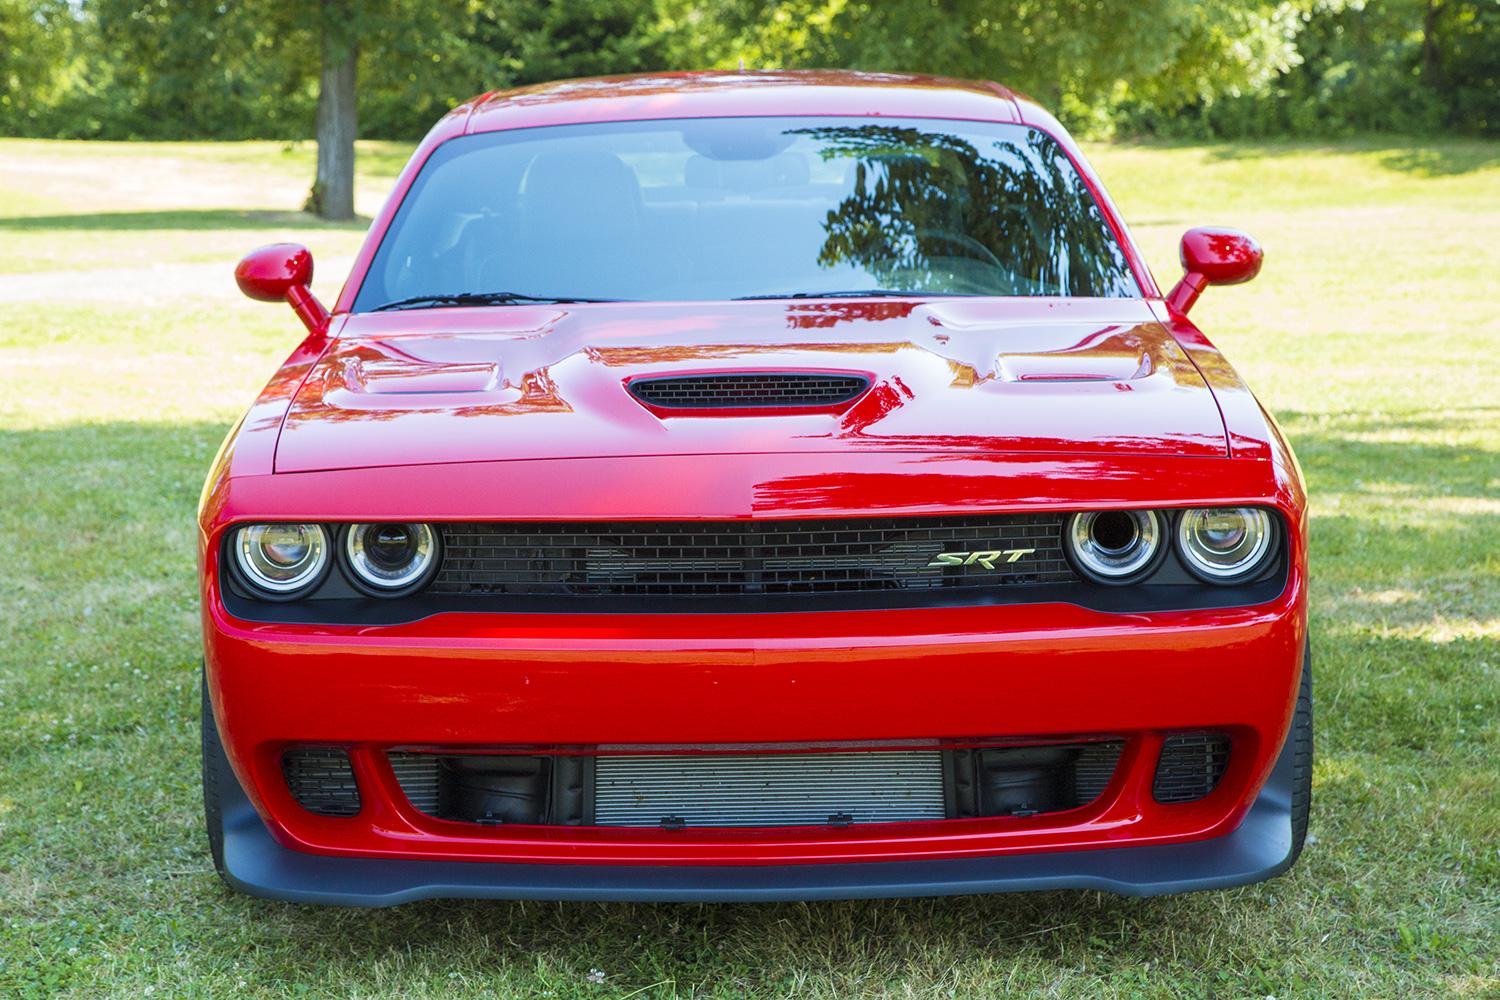 2015 Dodge Challenger SRT Hellcat Review Editor's Review, Car Reviews